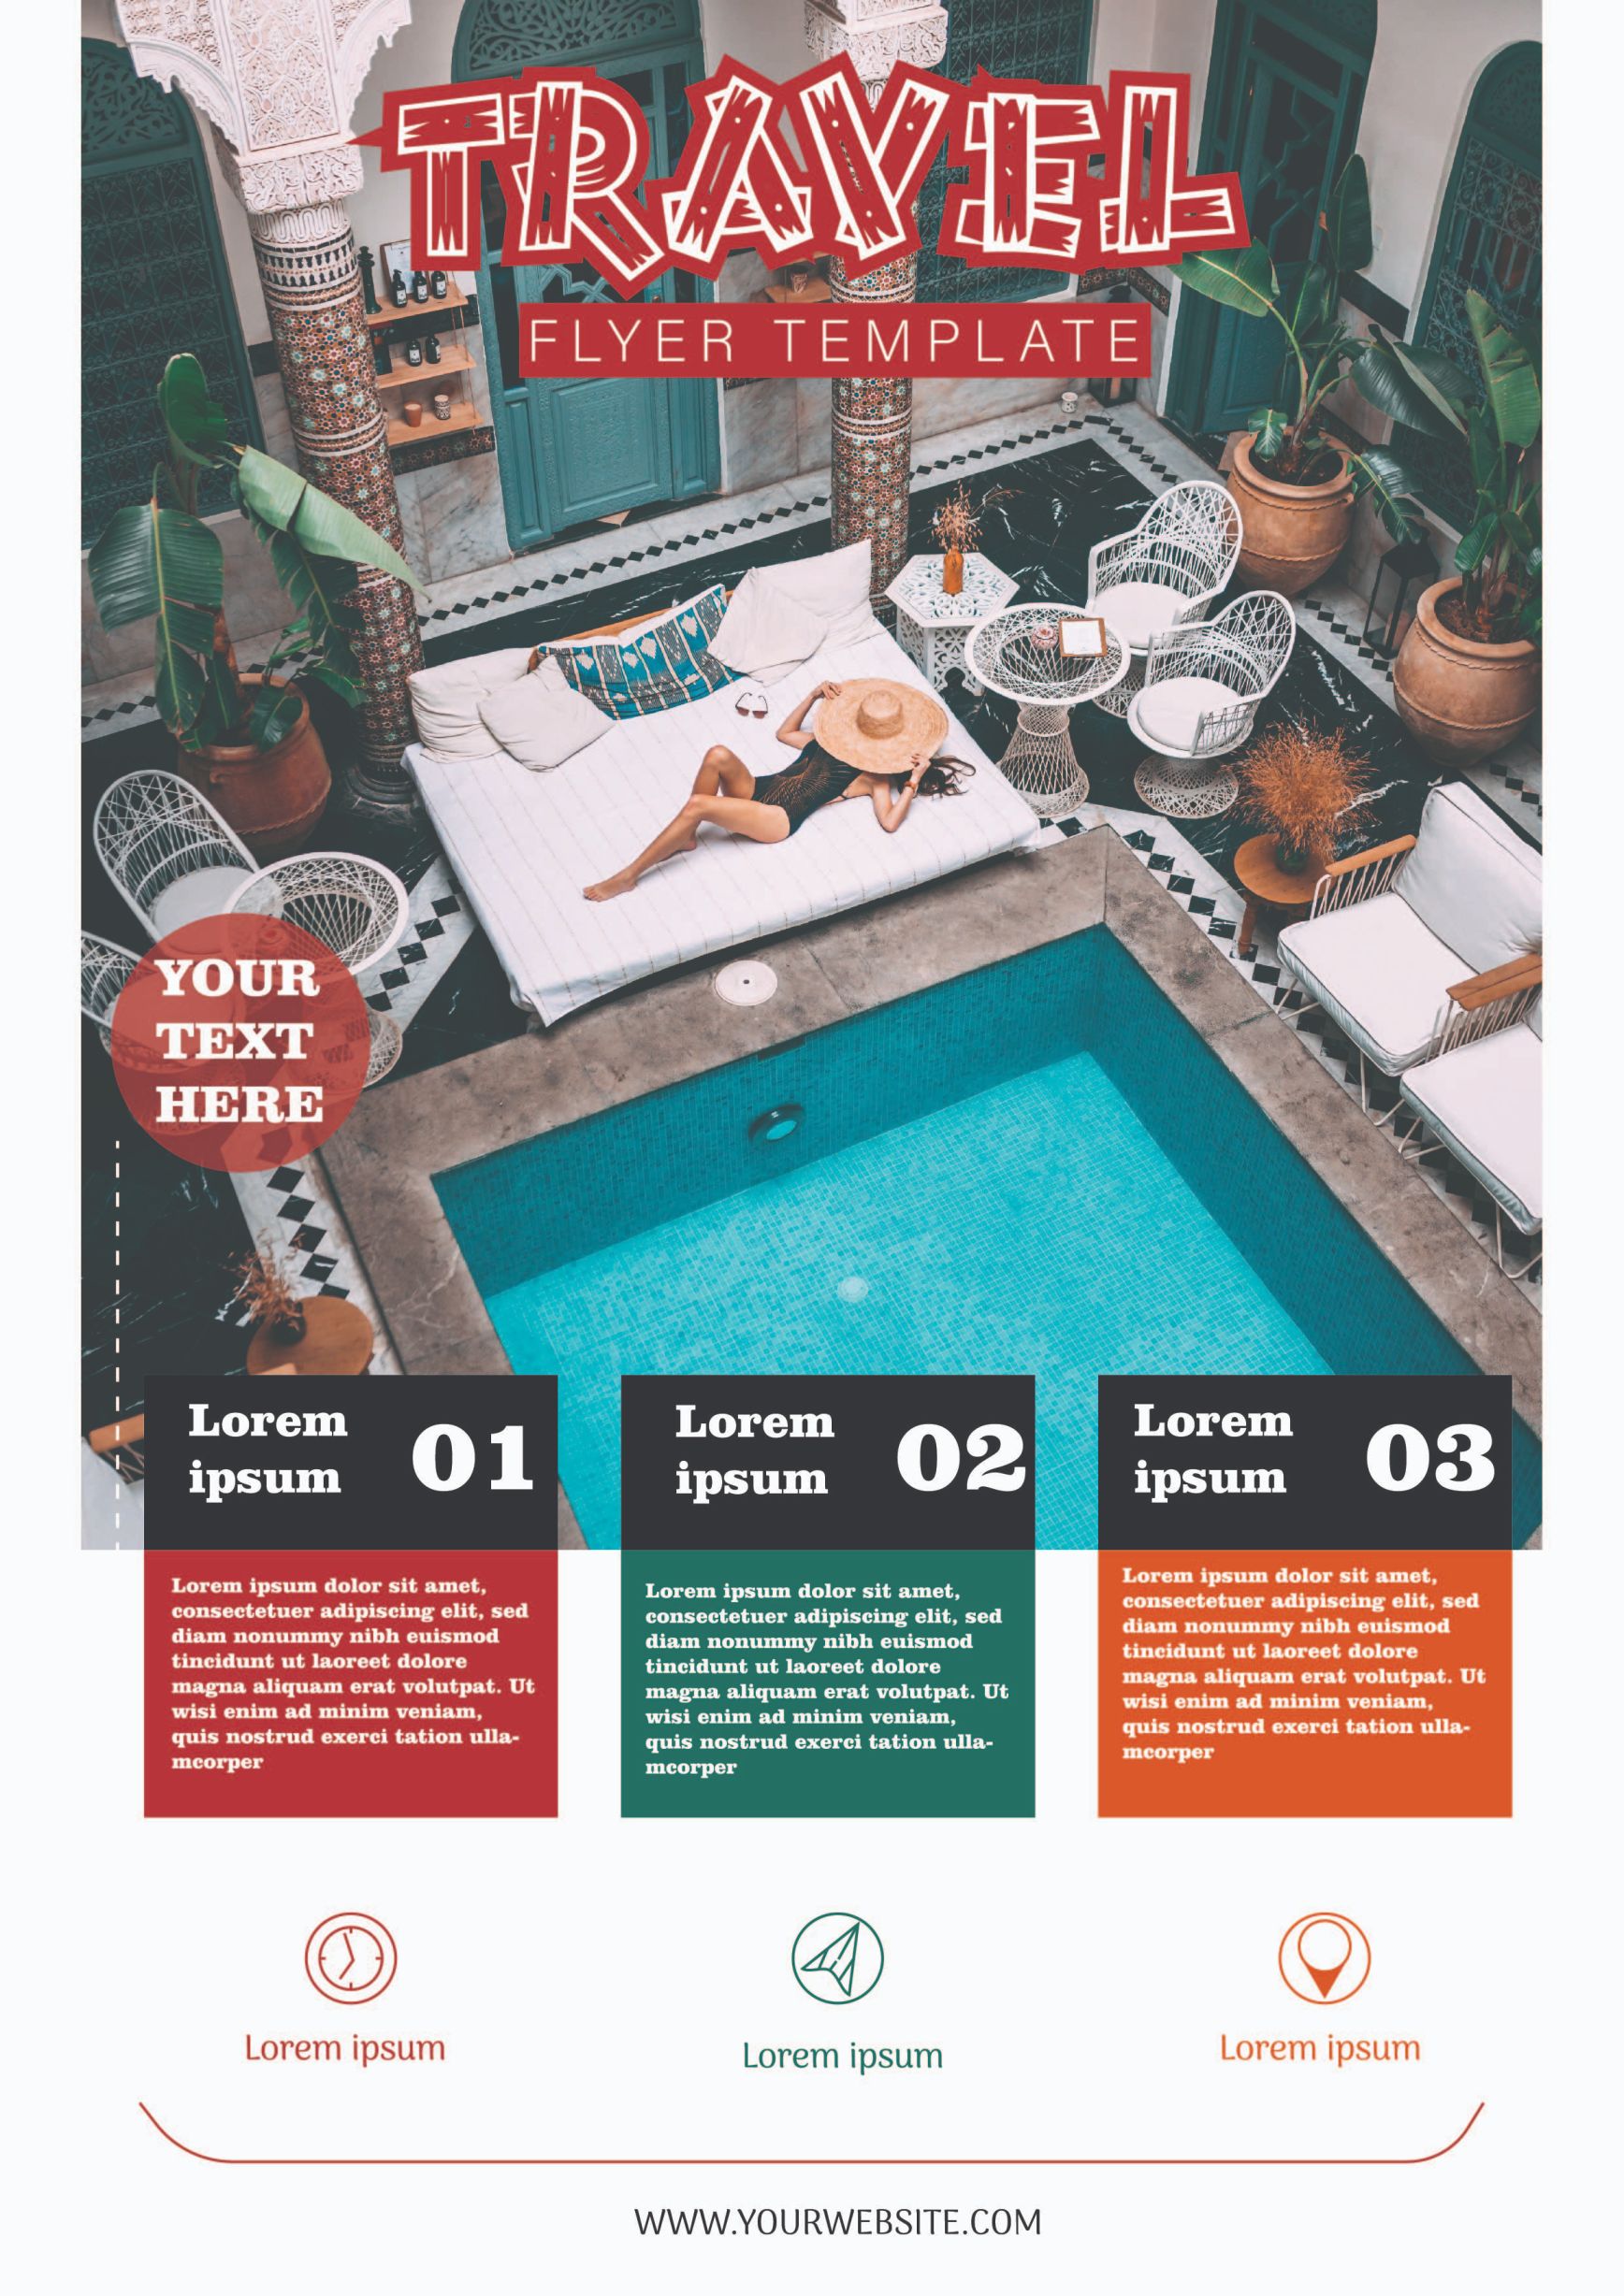 Flyer for a travel event with a pool.